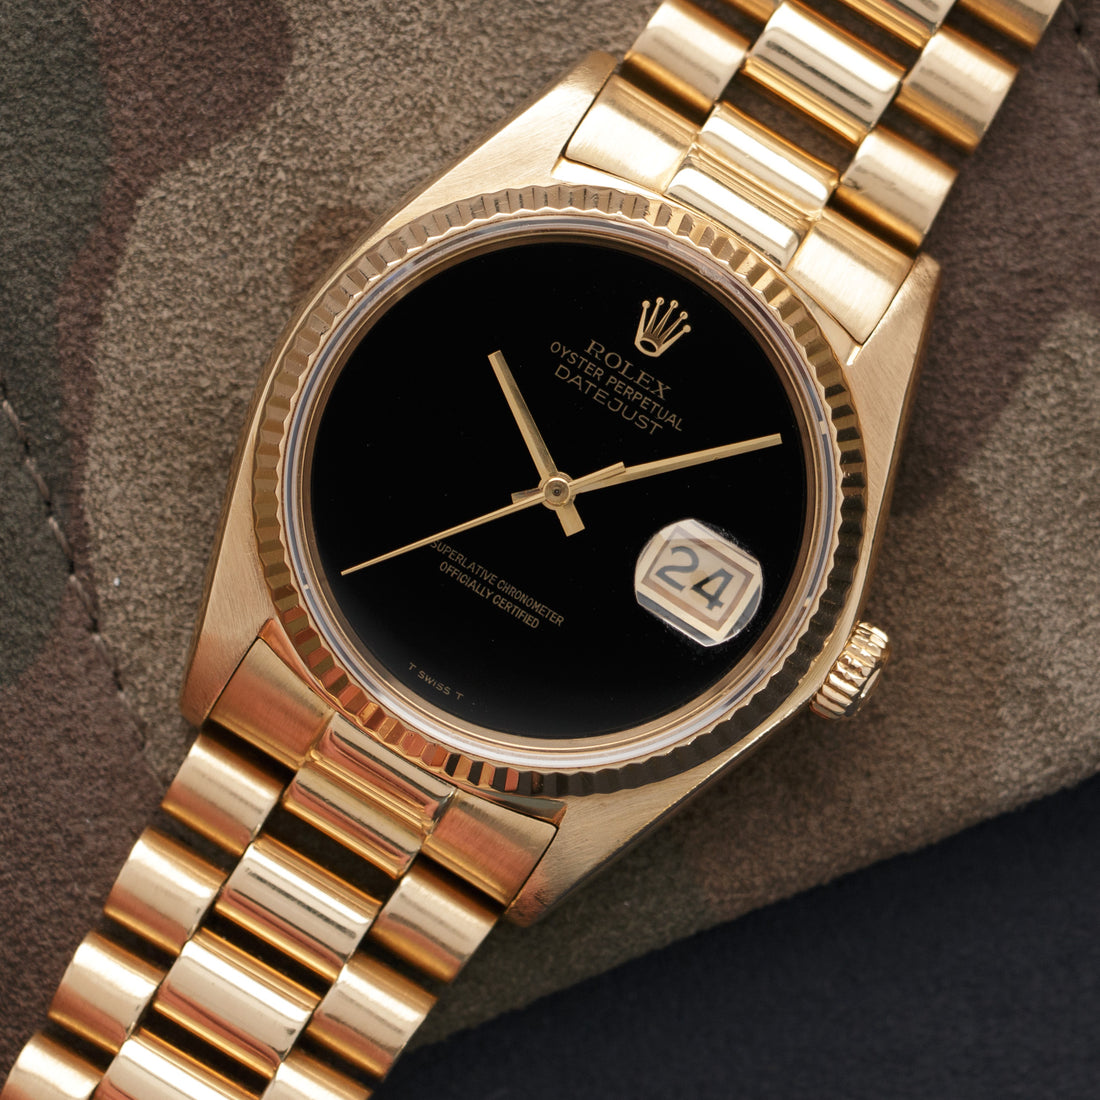 Rolex Yellow Gold Datejust Onyx Dial Watch, Ref. 16018